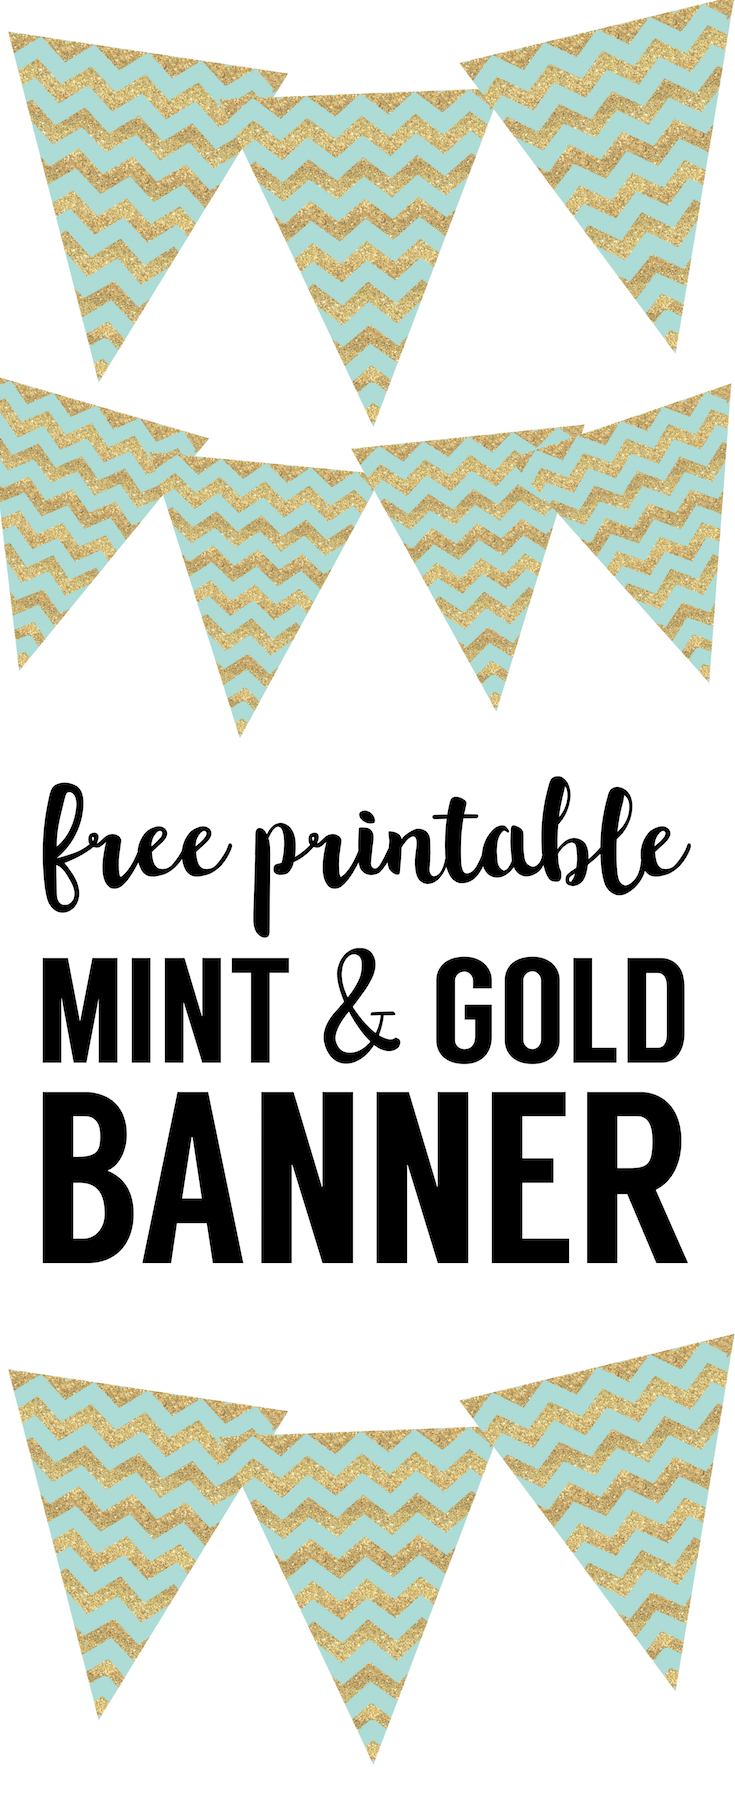 Mint & Gold banner. Free printable DIY banner for baby shower, wedding shower, birthday party or spring party. Great easy decor. 